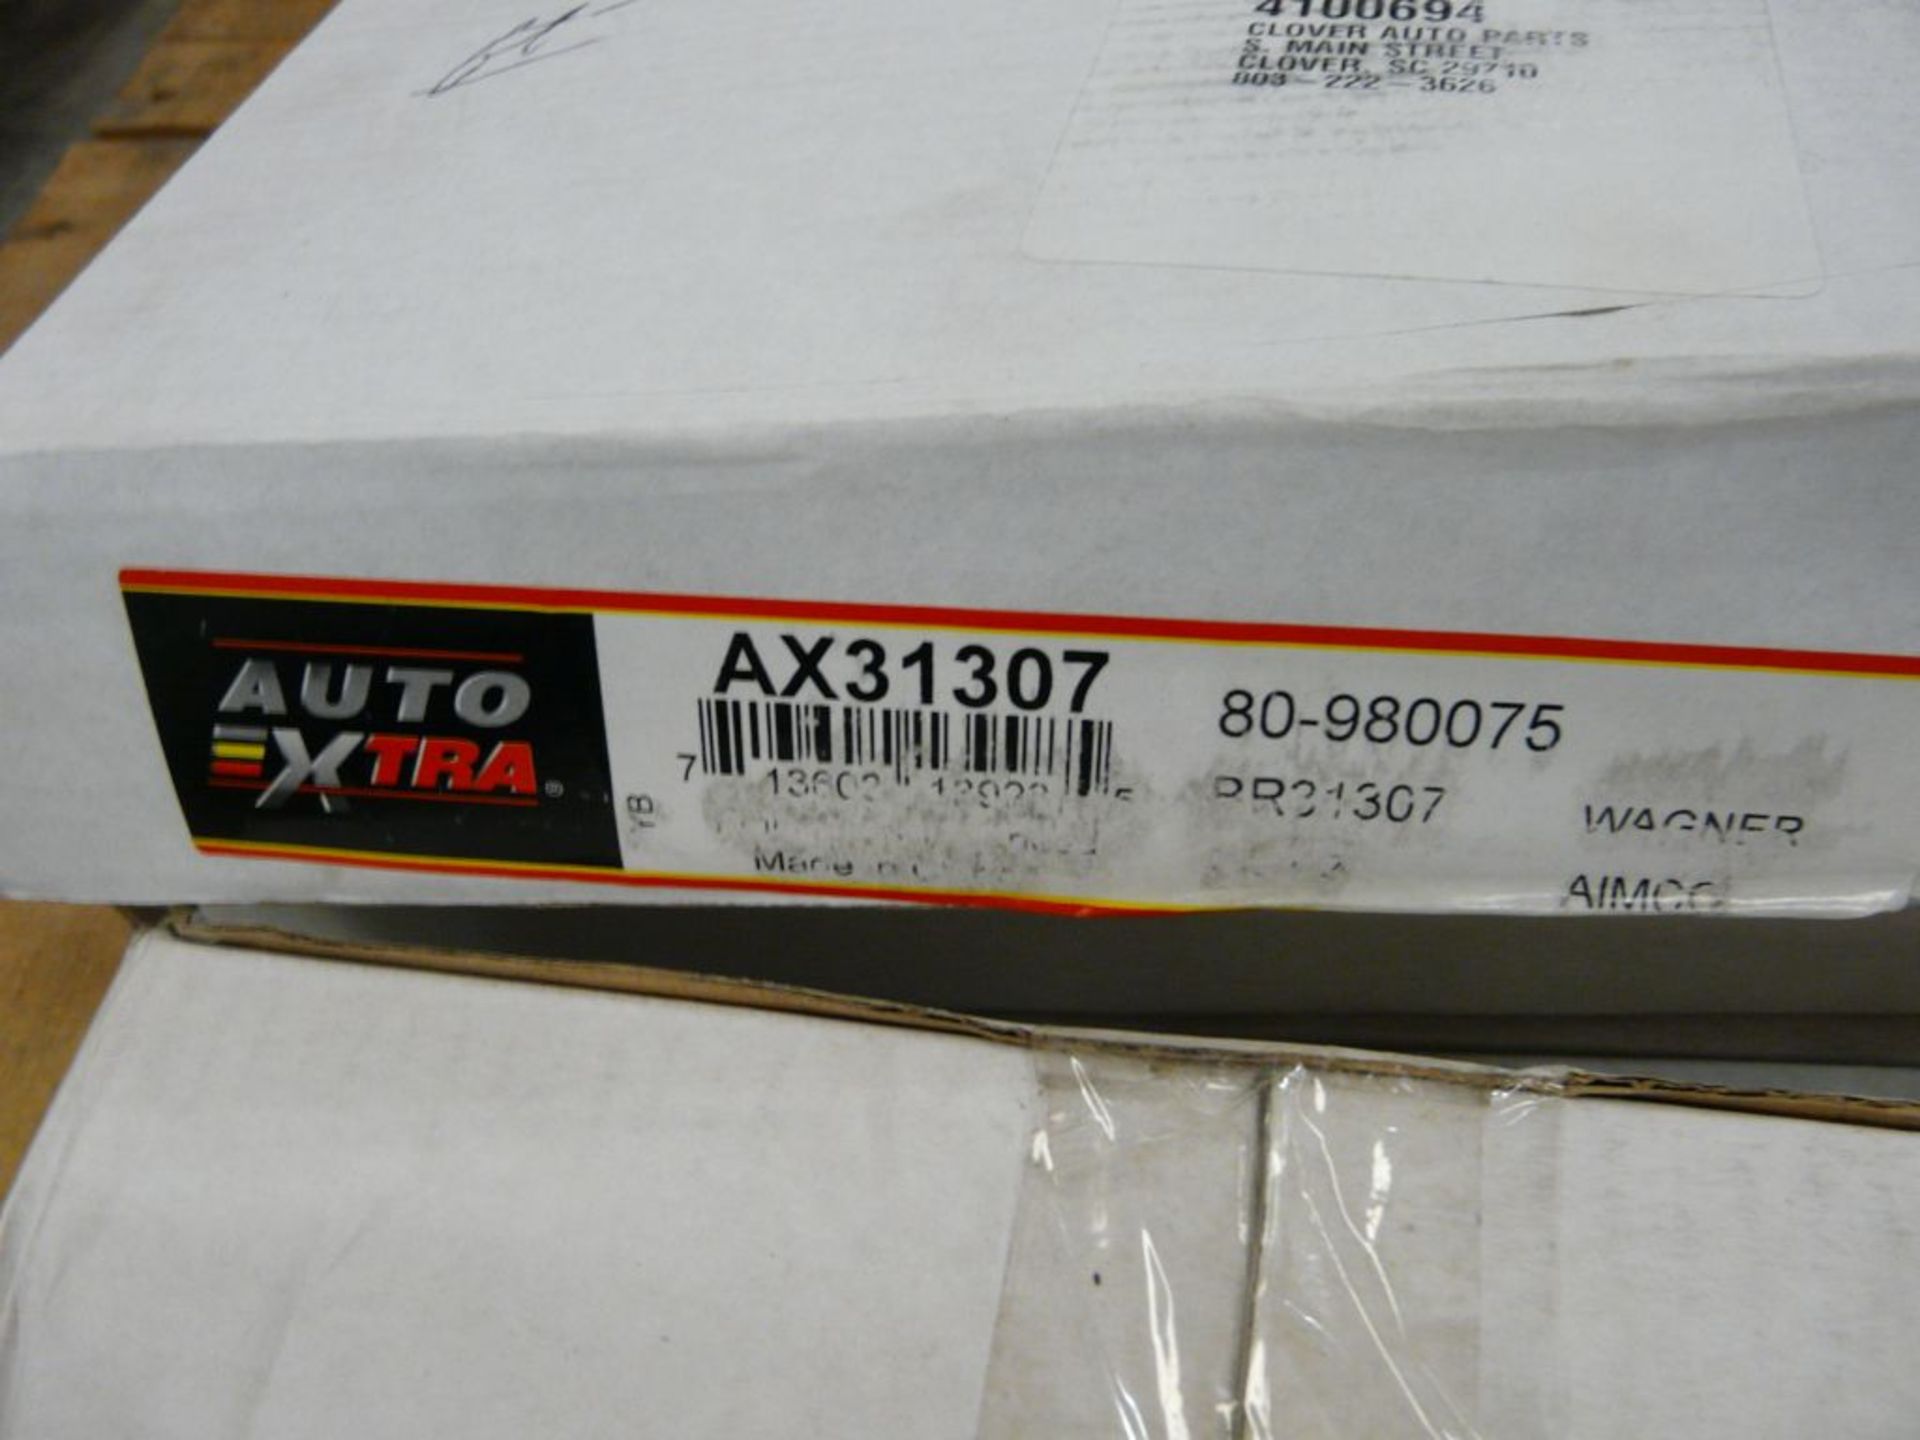 Lot of Assorted Auto Extra Brake Rotors | Part No's. Include: AX5552; AX31307; AX31043; Tag: 236160 - Image 5 of 8